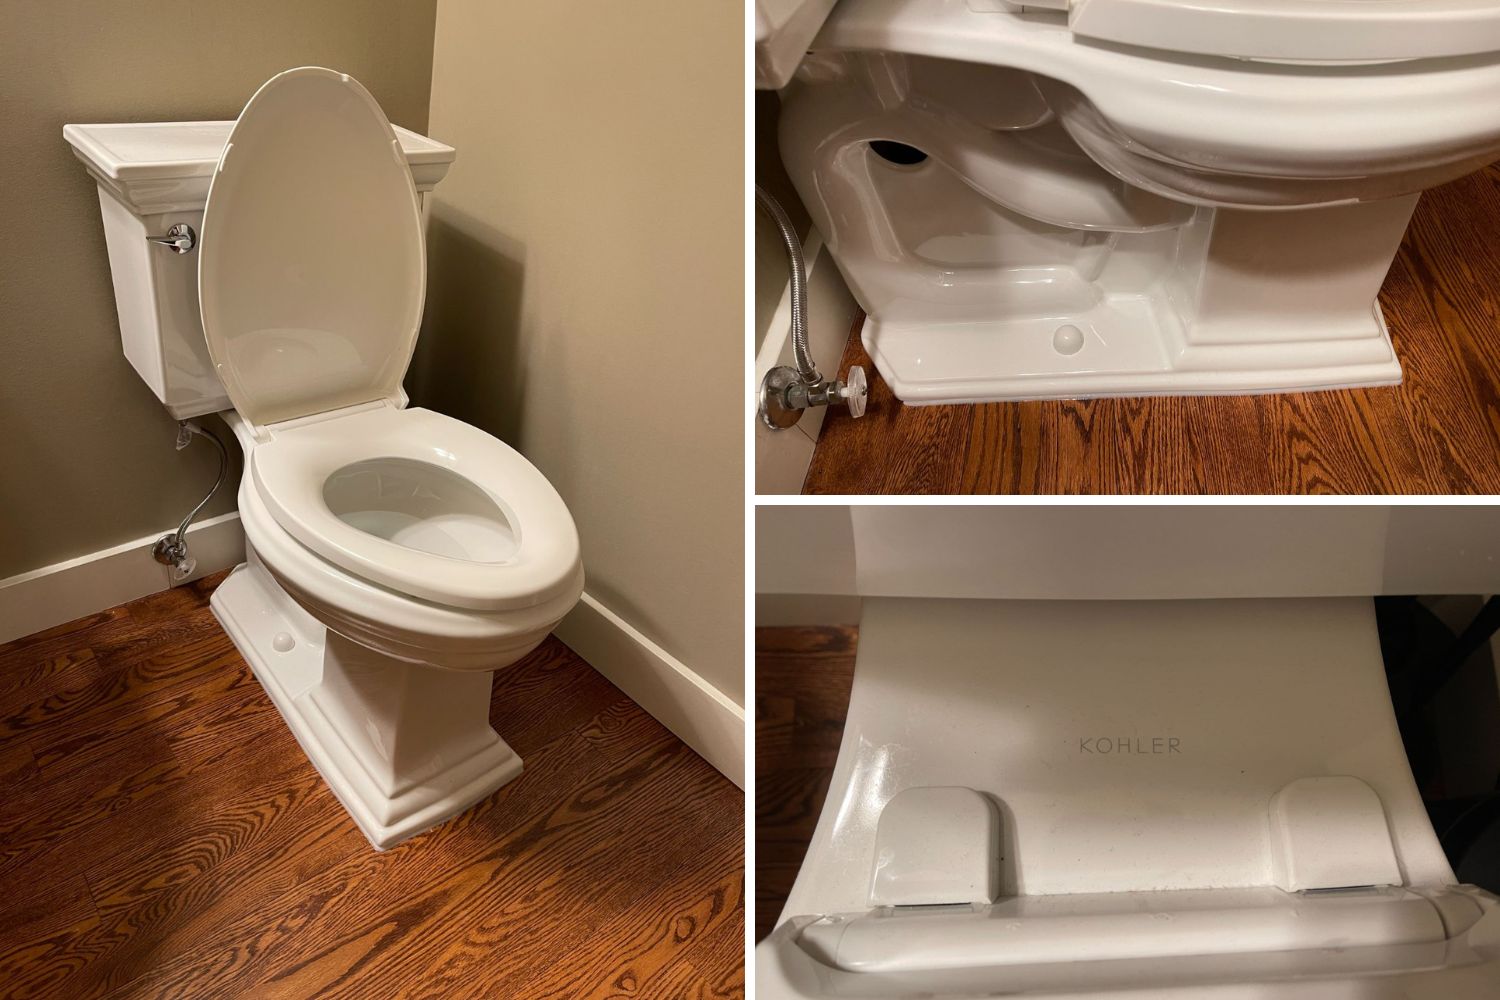 We Just Installed a Kohler Toilet and this is My Review